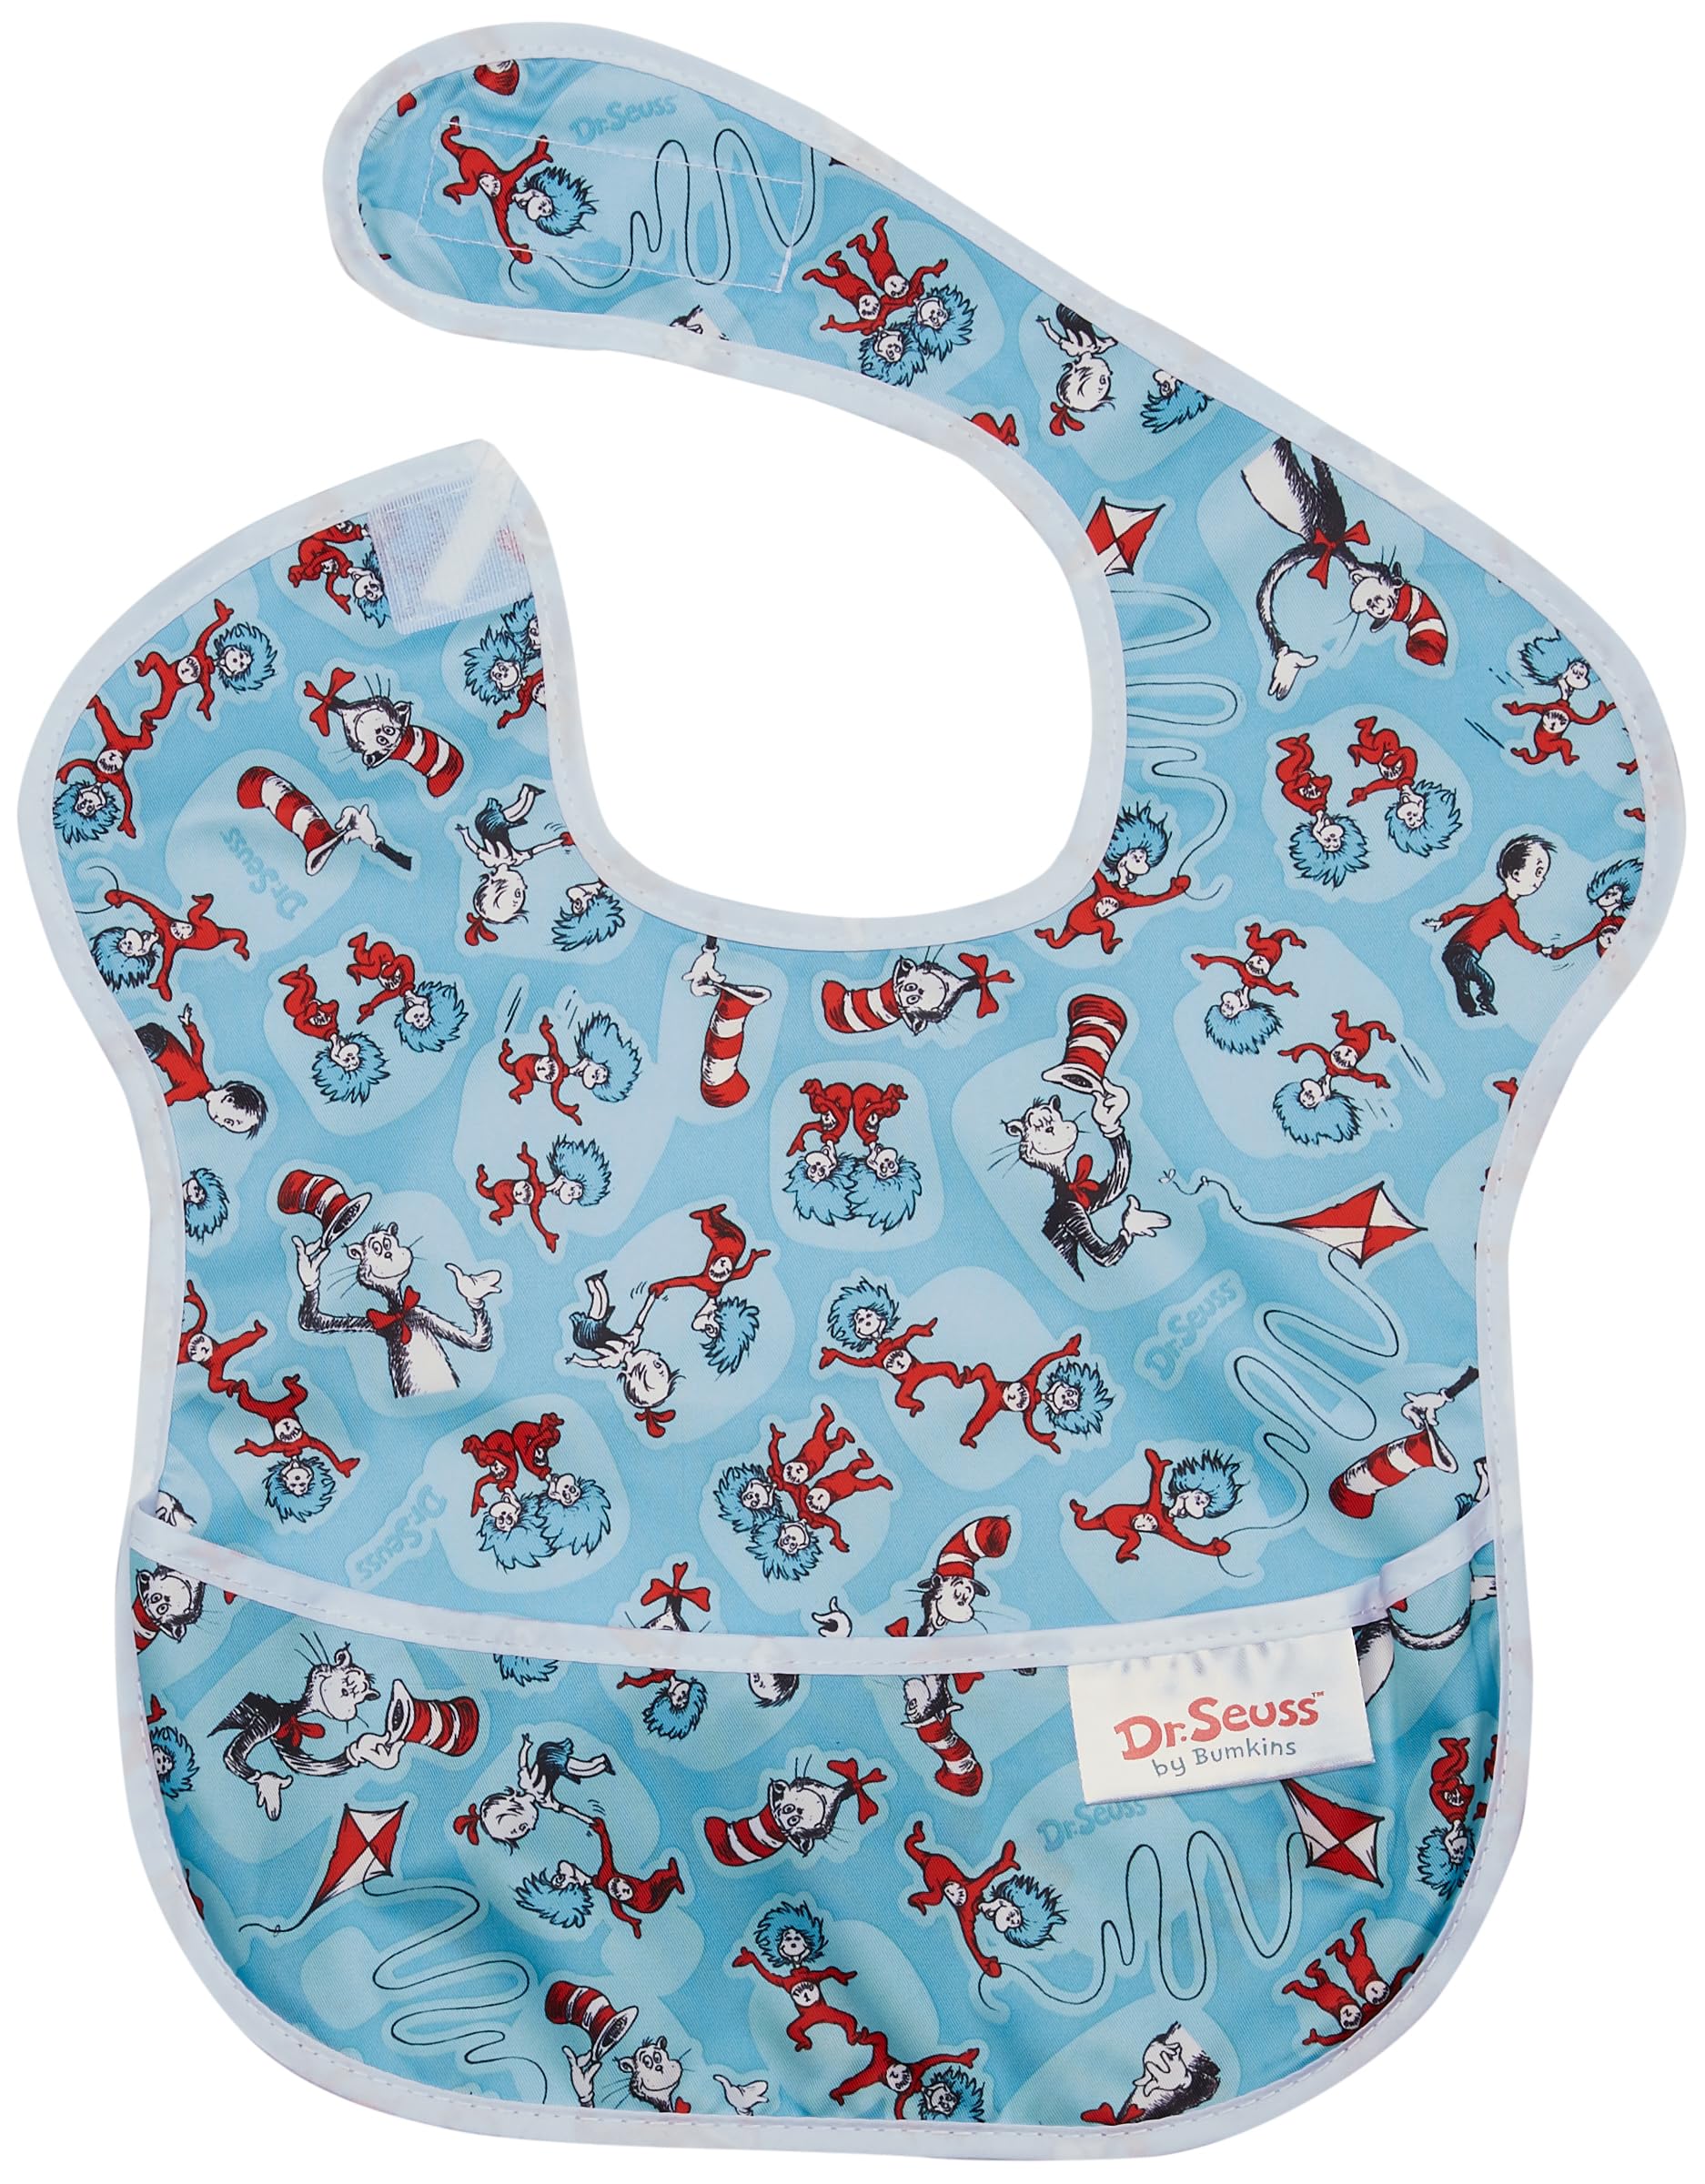 Bumkins Dr Seuss SuperBib, Baby Bib, Waterproof, Washable, Stain and Odor Resistant, 6-24 Months (Pack of 3) - Green Eggs, Yellow Fish, Cat In The Hat